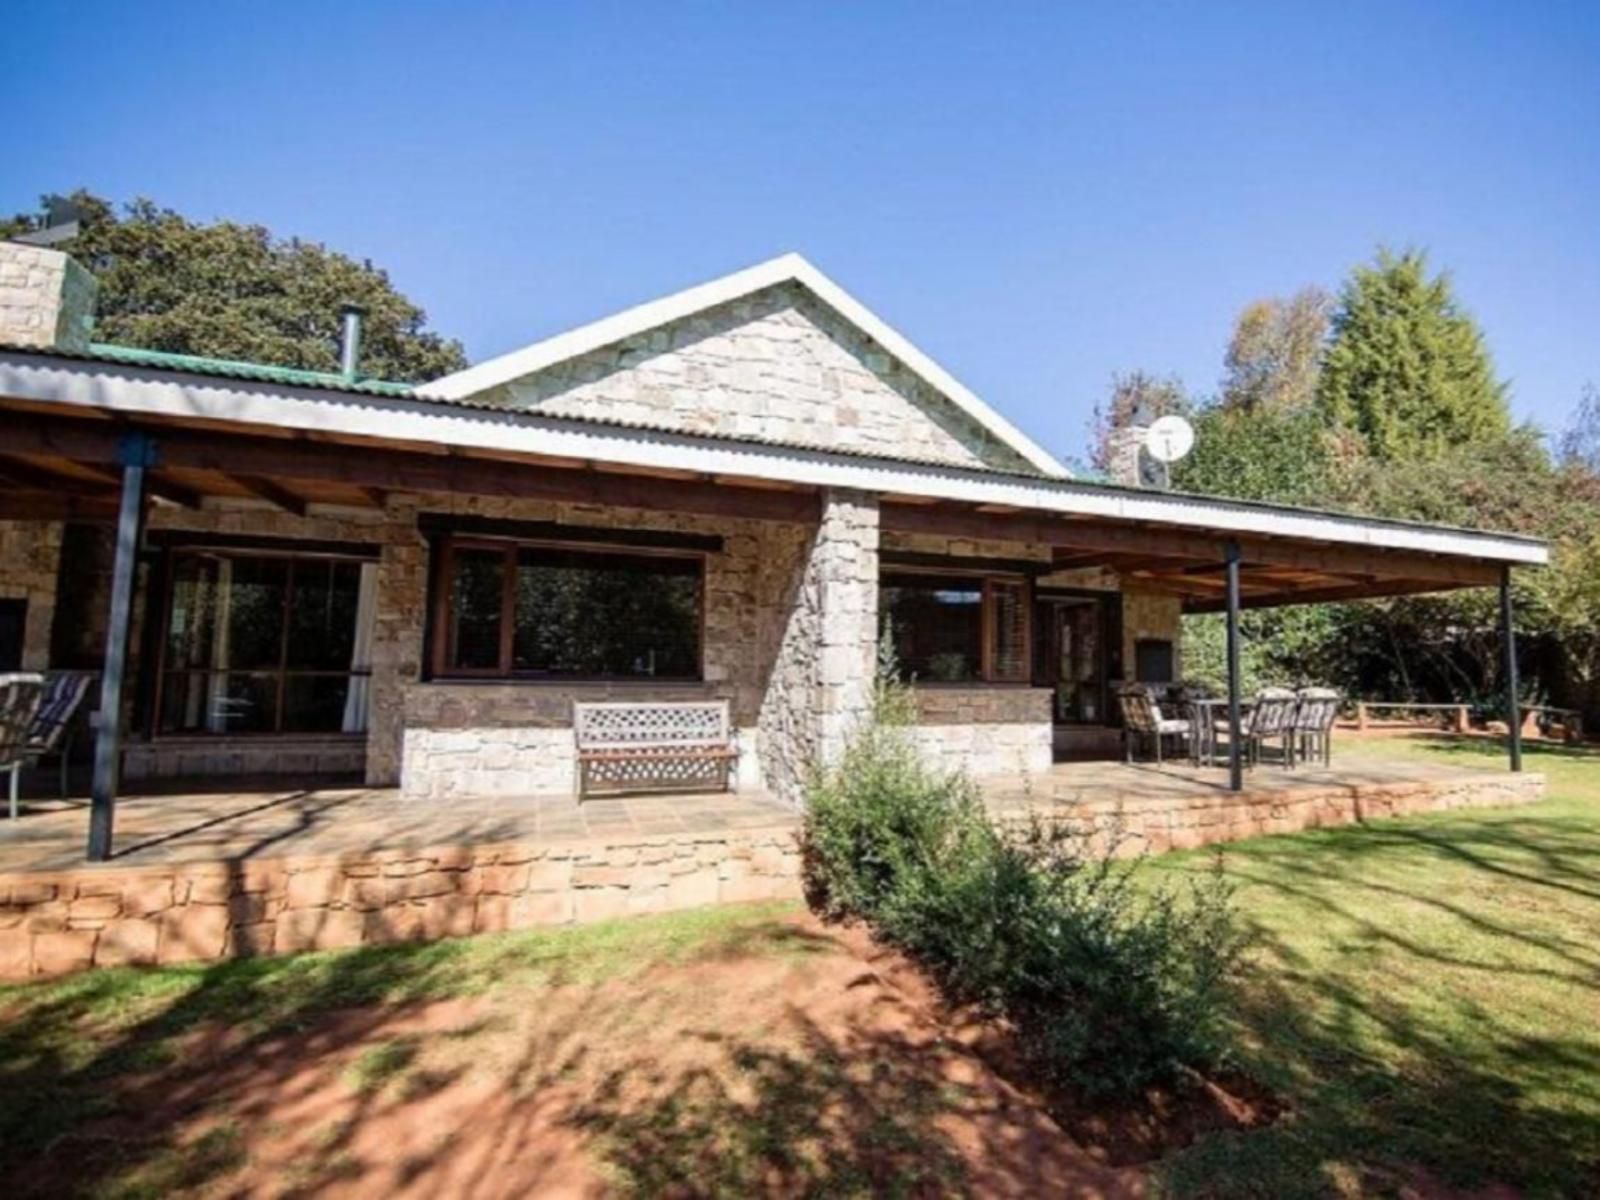 Big Oak Cottages Dullstroom Mpumalanga South Africa Complementary Colors, Cabin, Building, Architecture